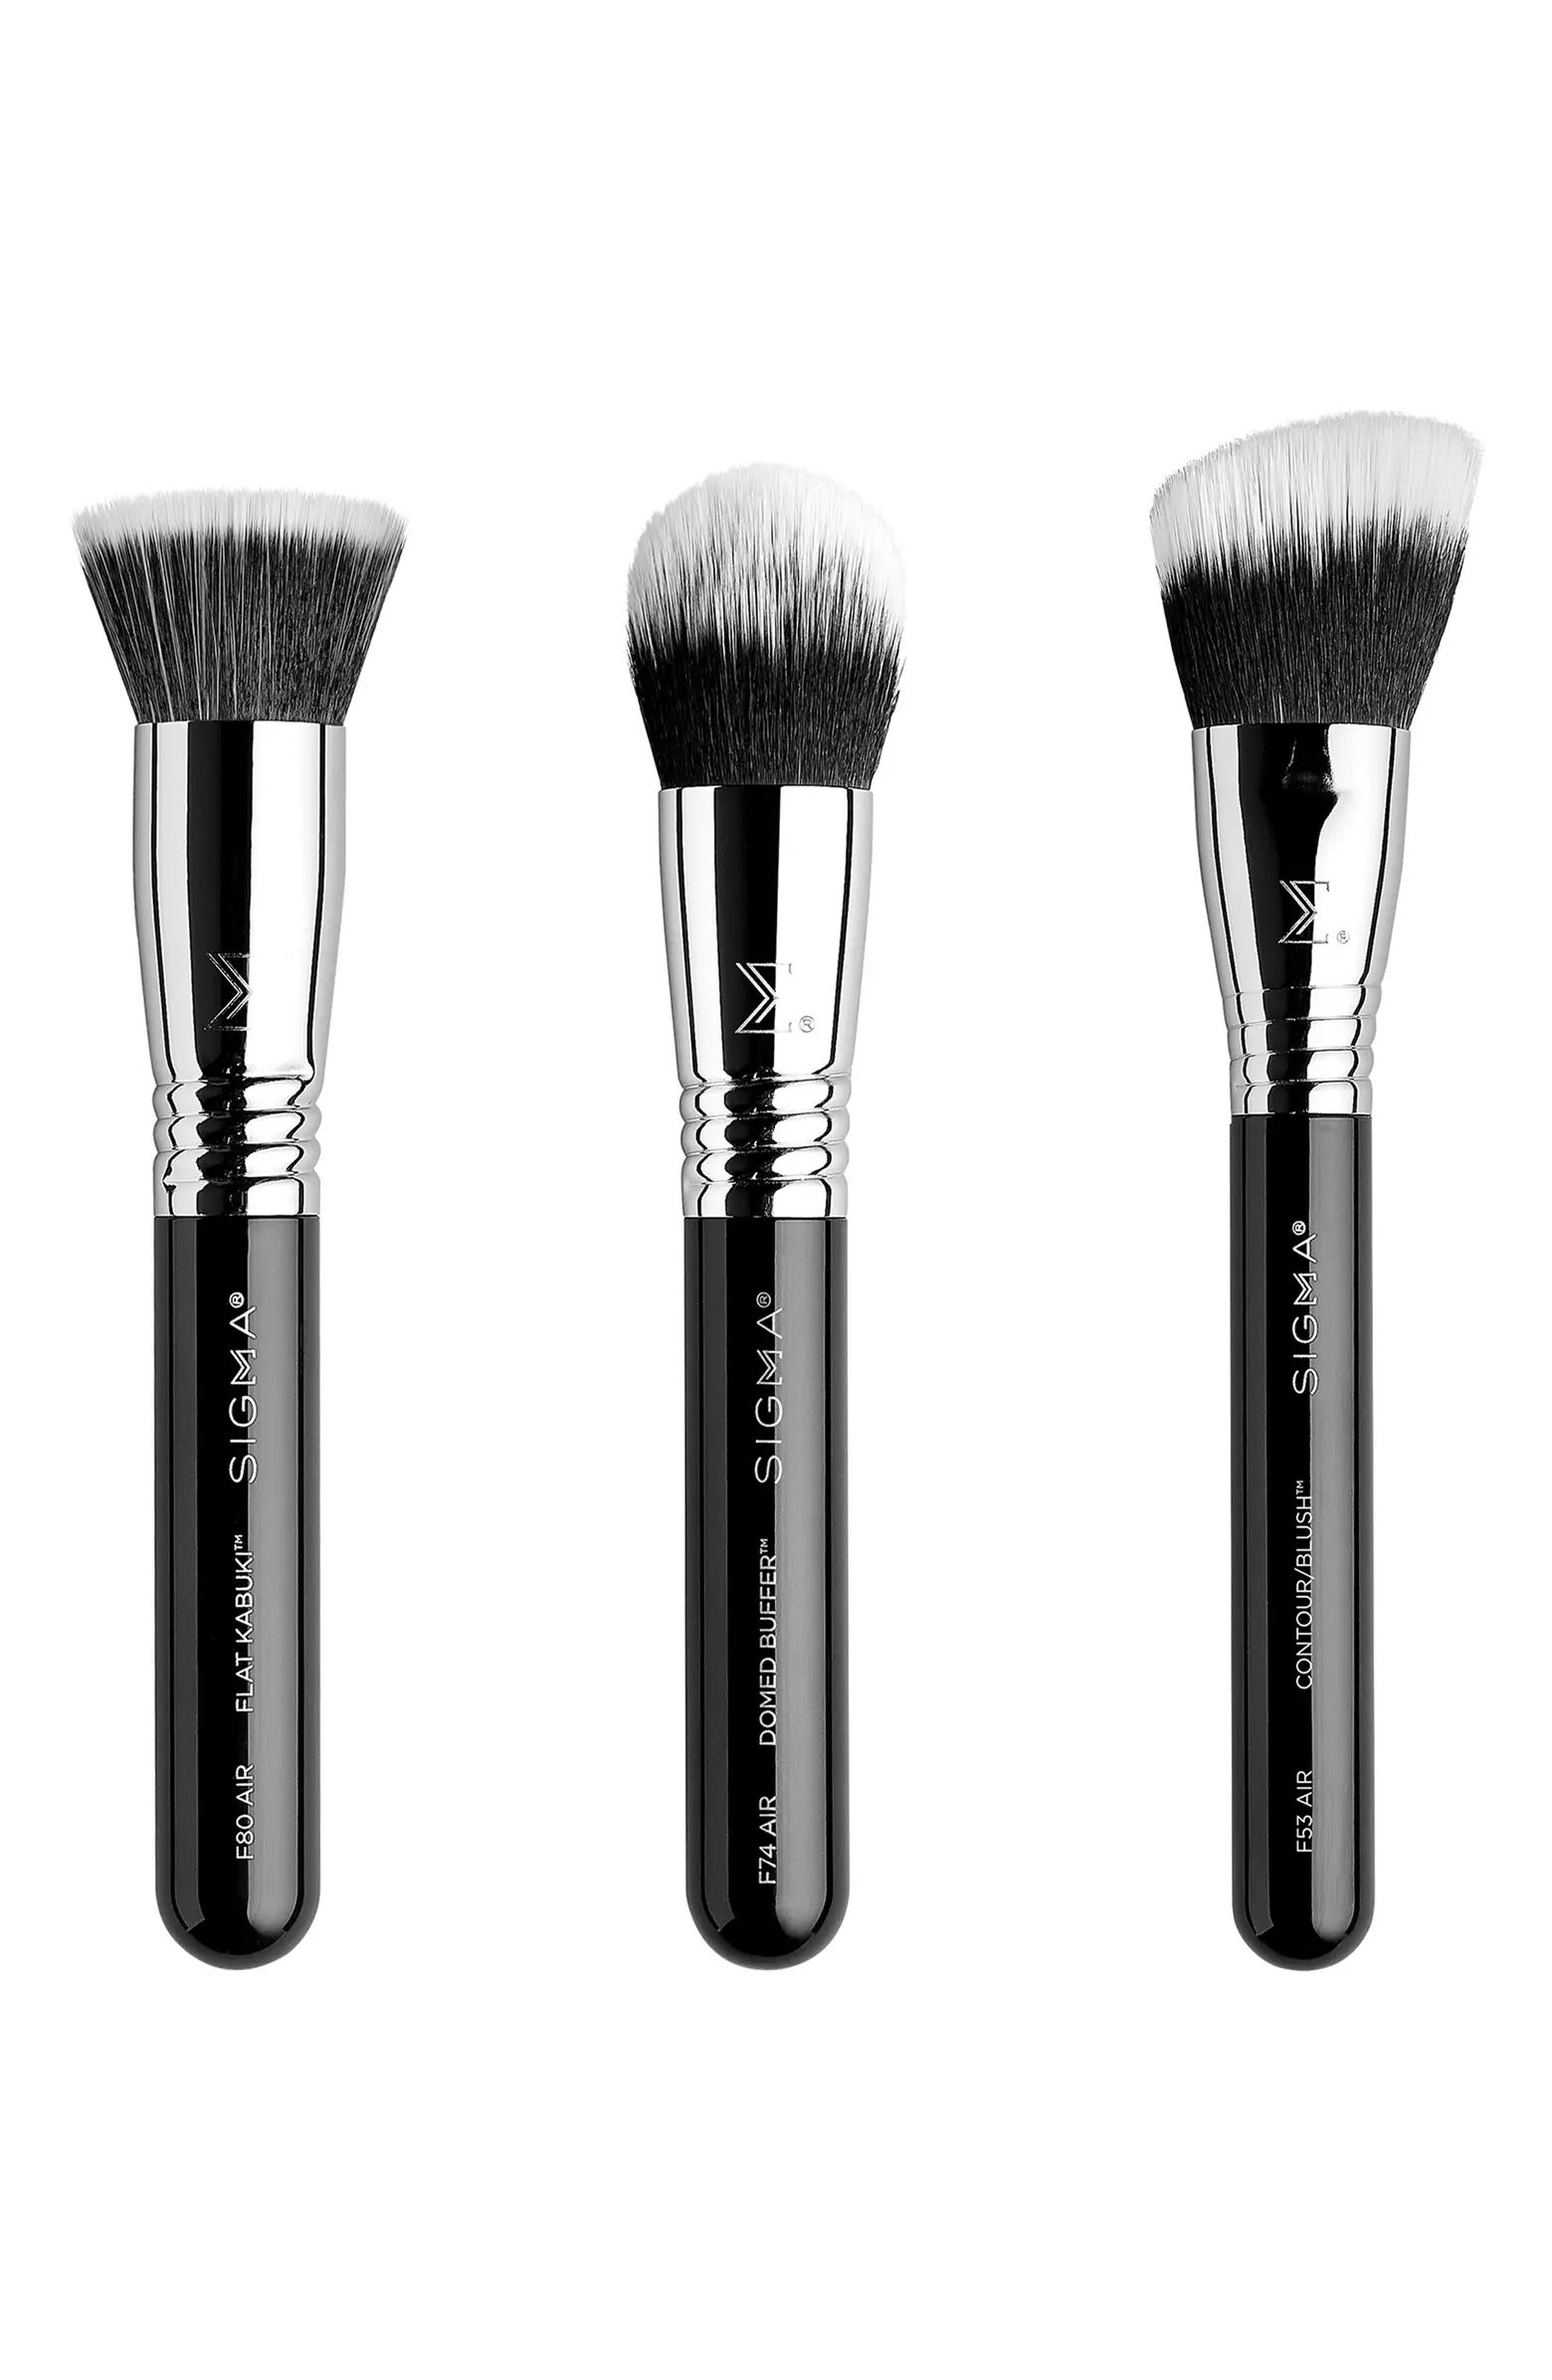 Sigma Beauty All About Face Makeup Brush Trio Set $76 Value | Nordstrom | Nordstrom